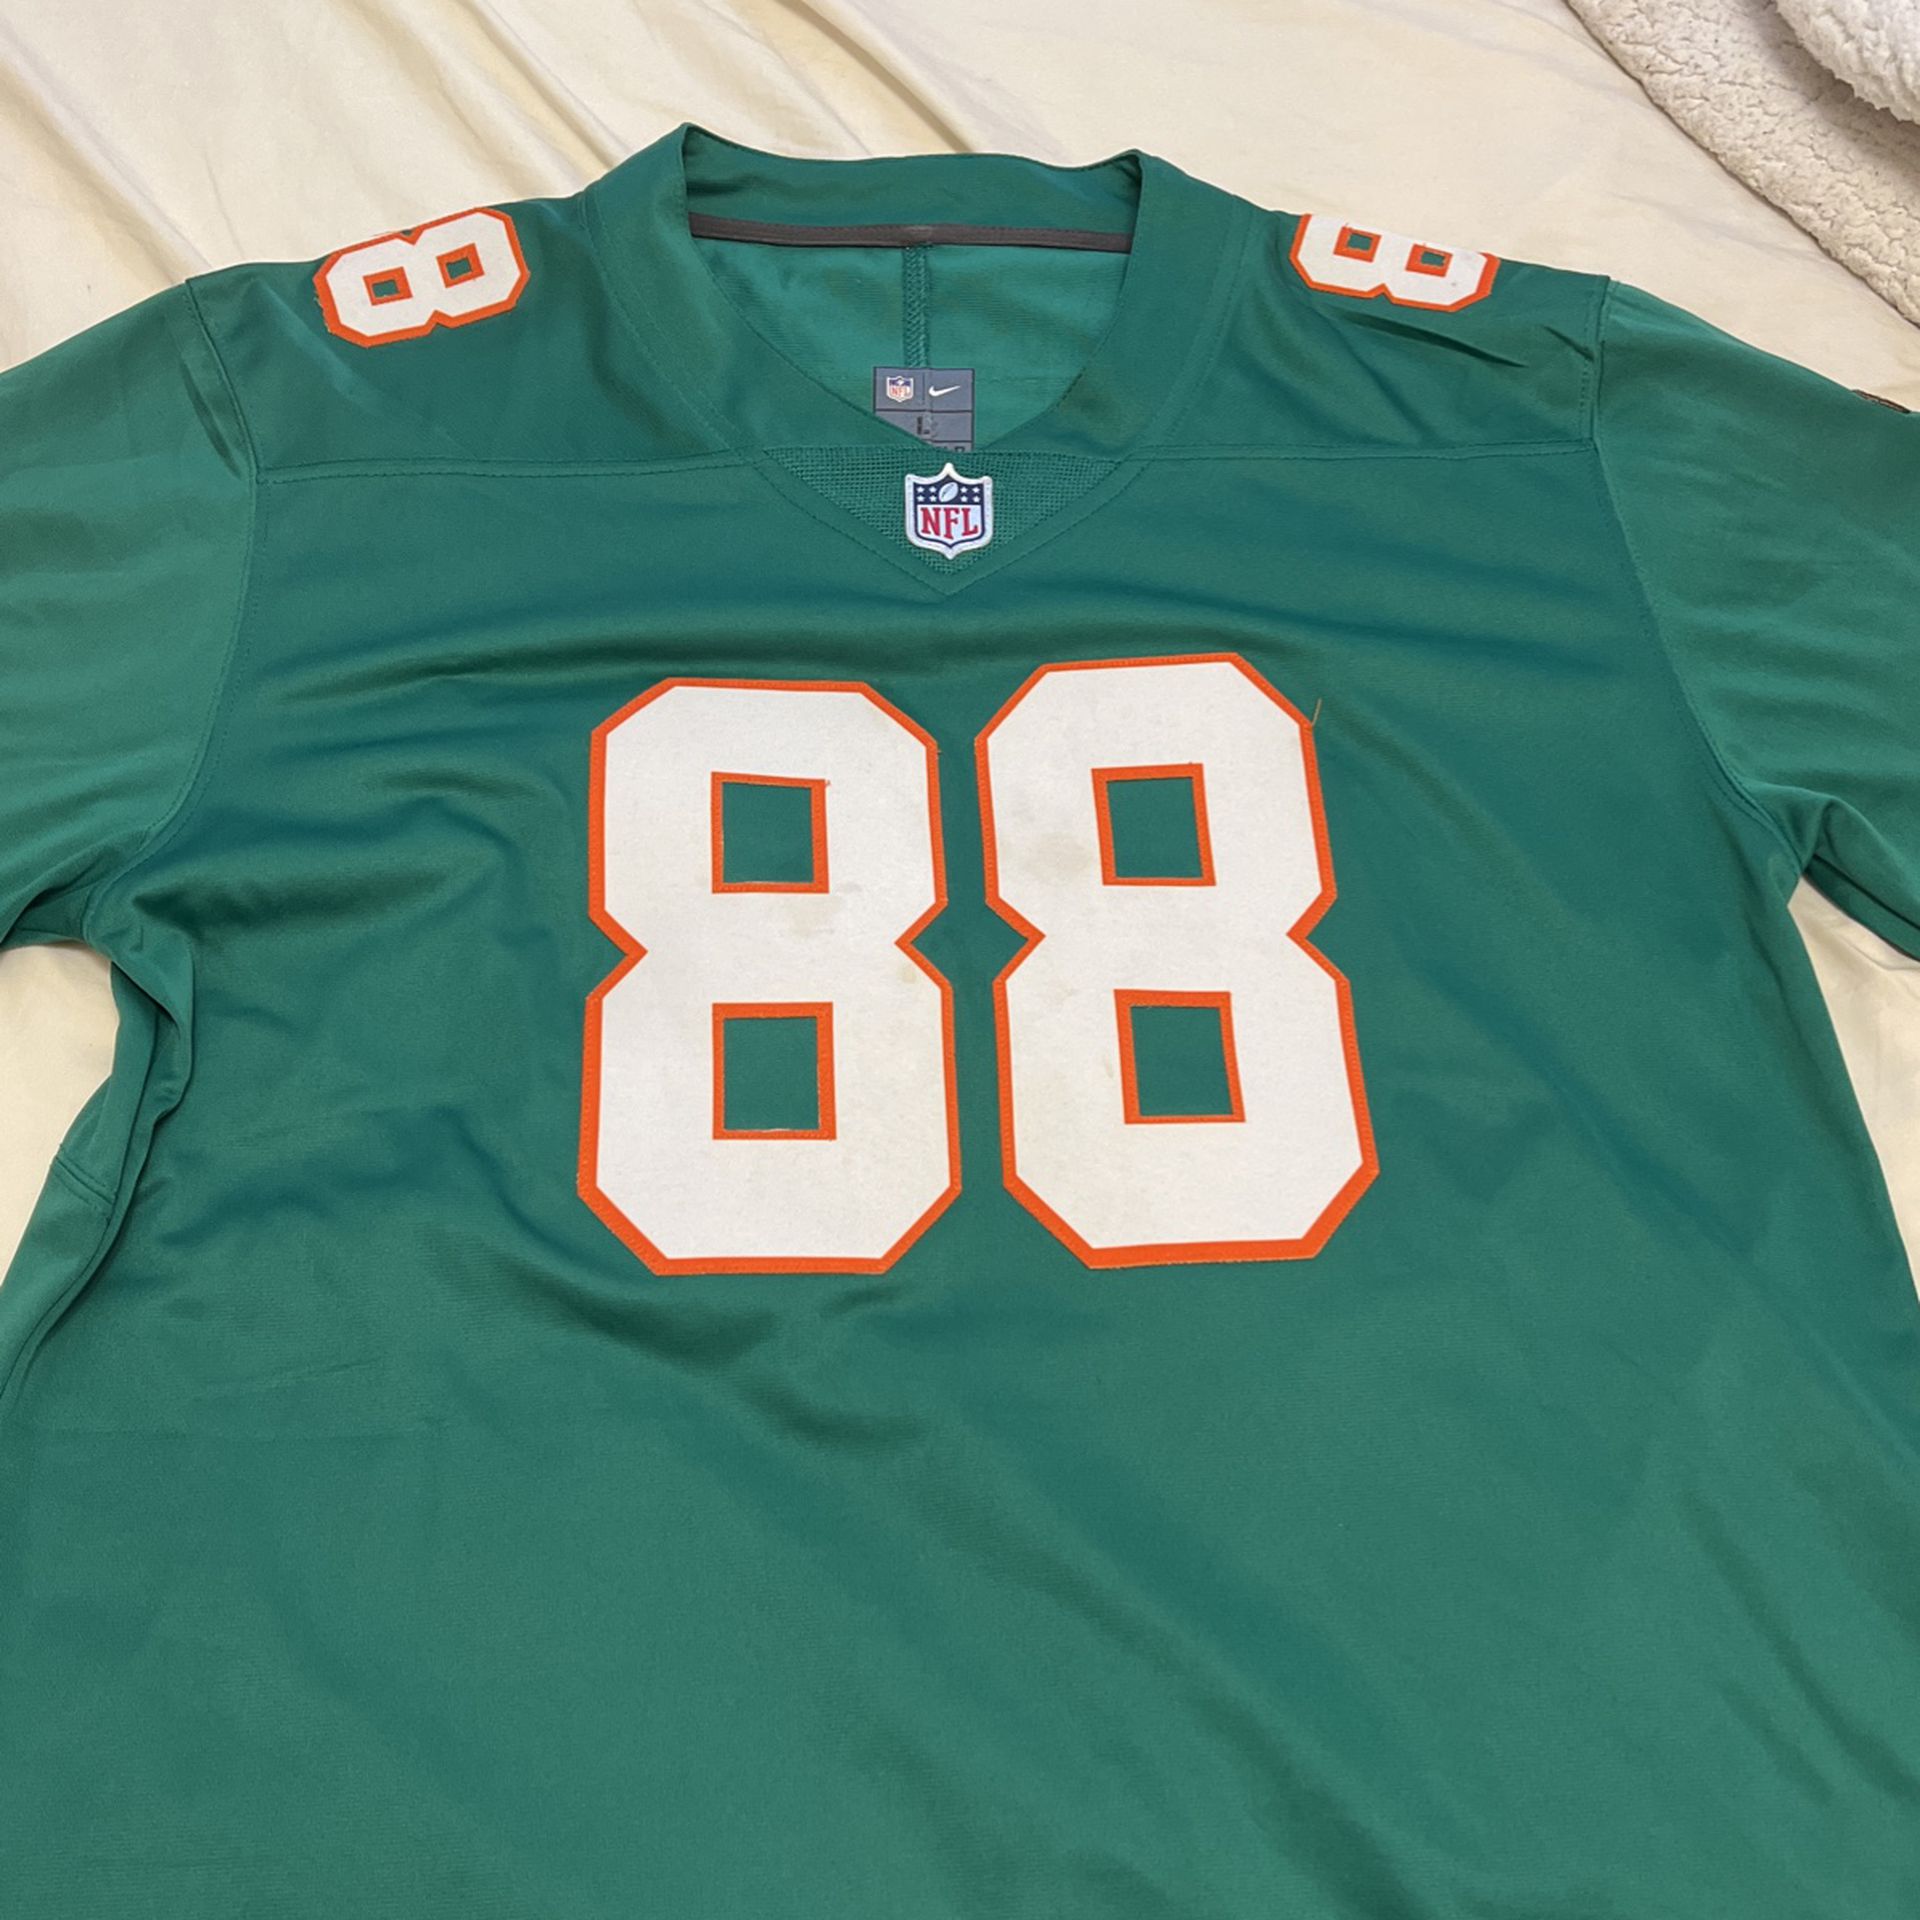 Nike NFL Dolphins Mike Gesicki Jersey Large